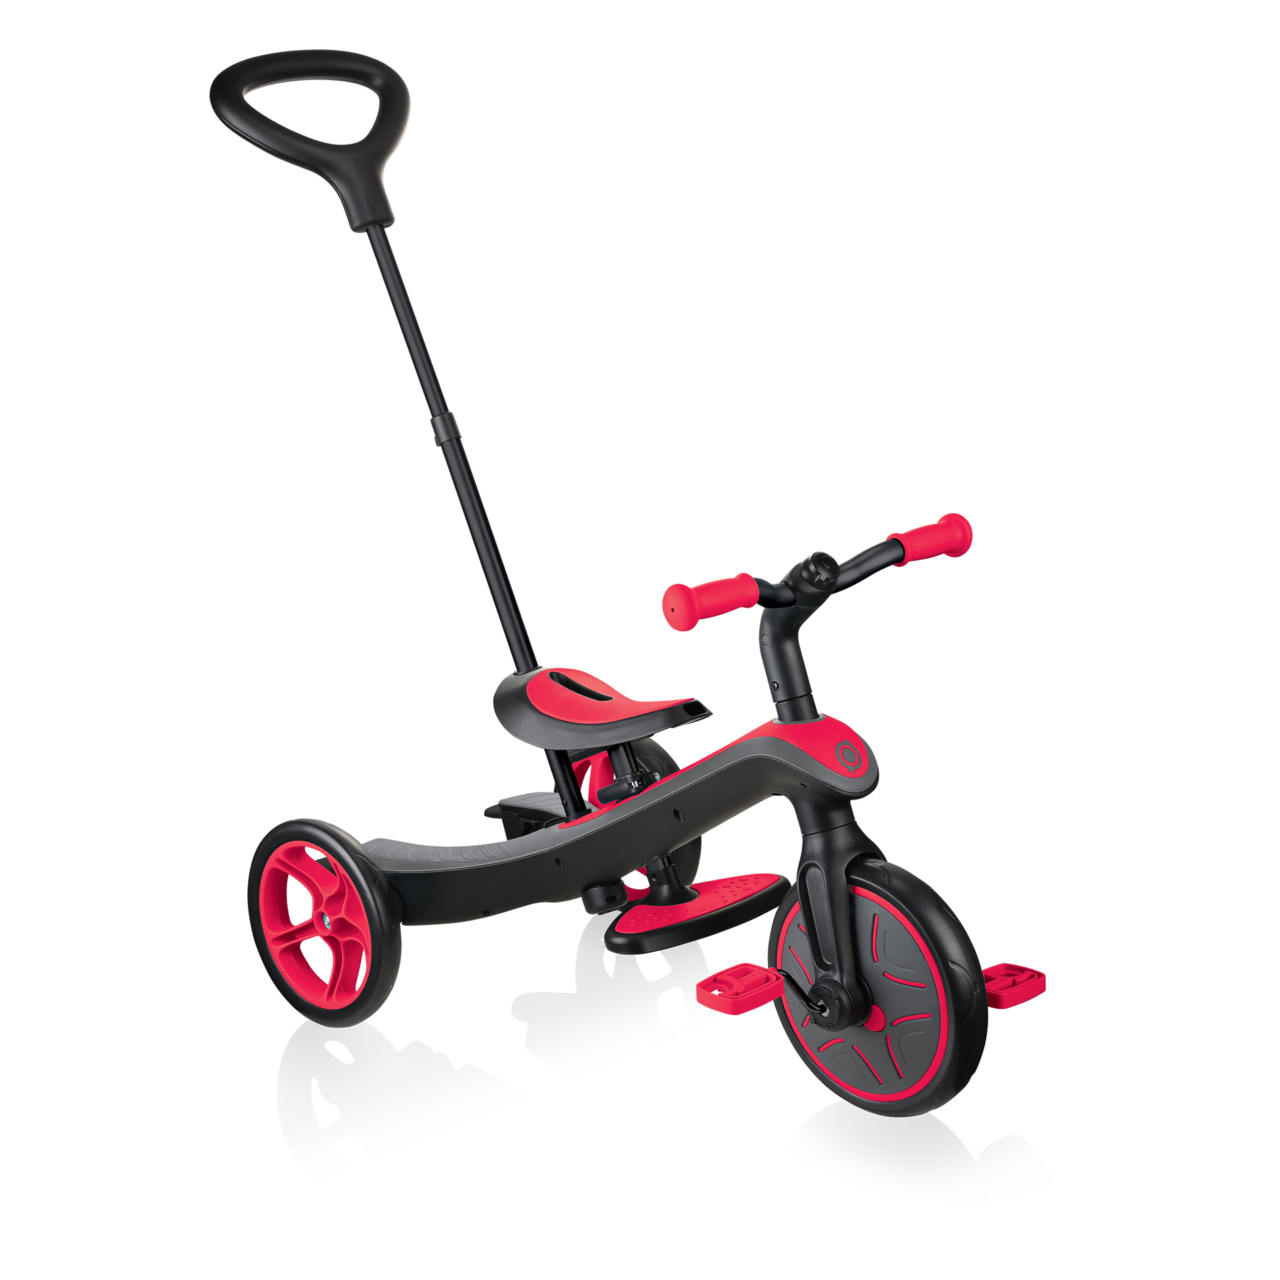 Convertible Tricycle: EXPLORER 4in1